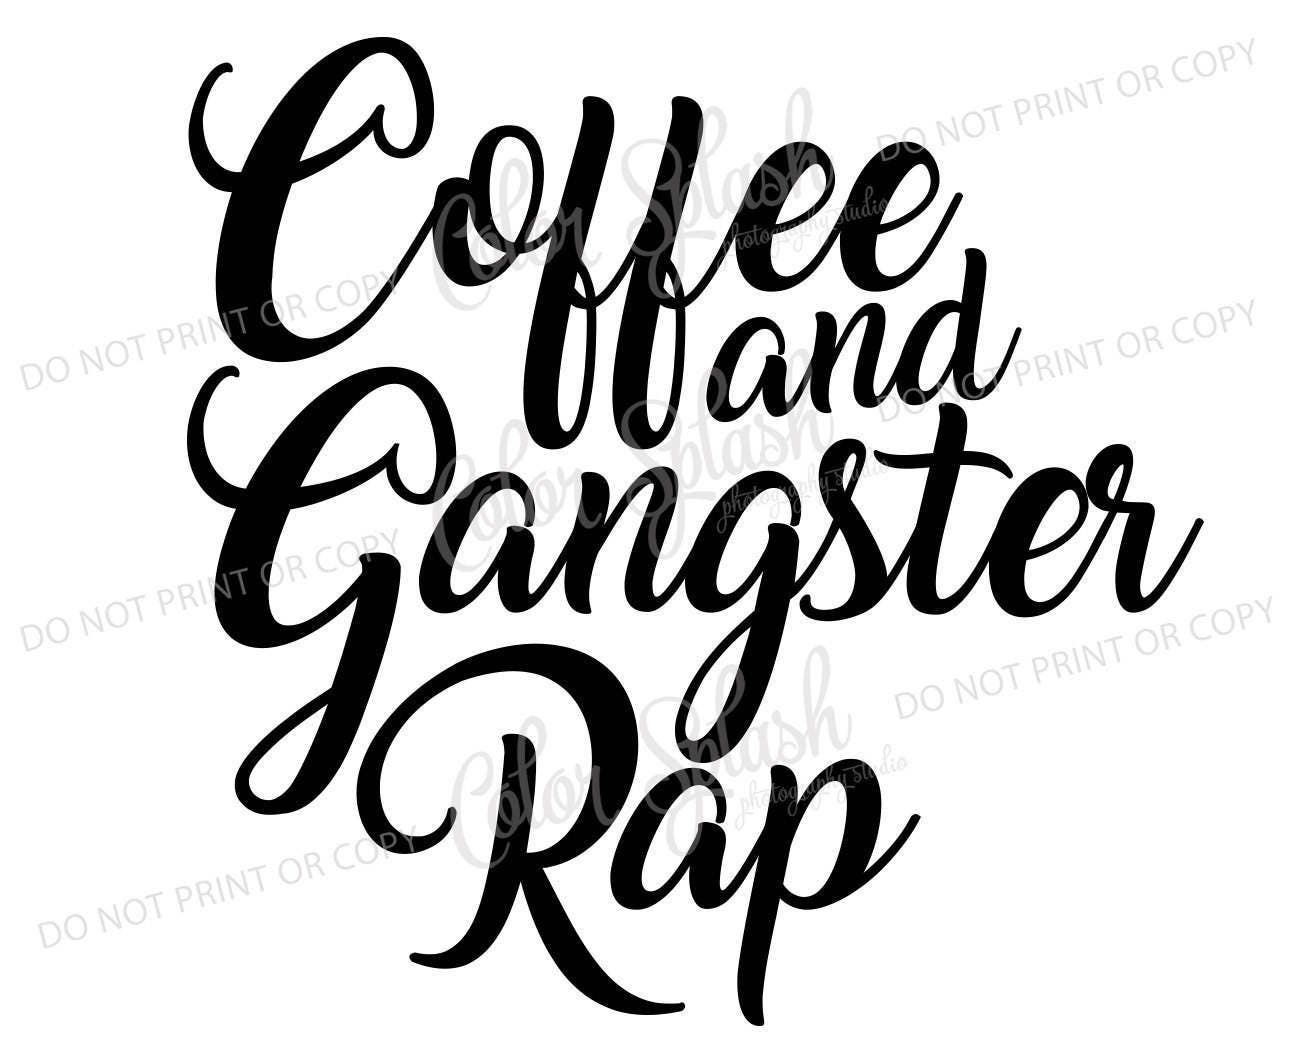 Download Coffee and gangster rap svg cutting file silhouette cameo ...